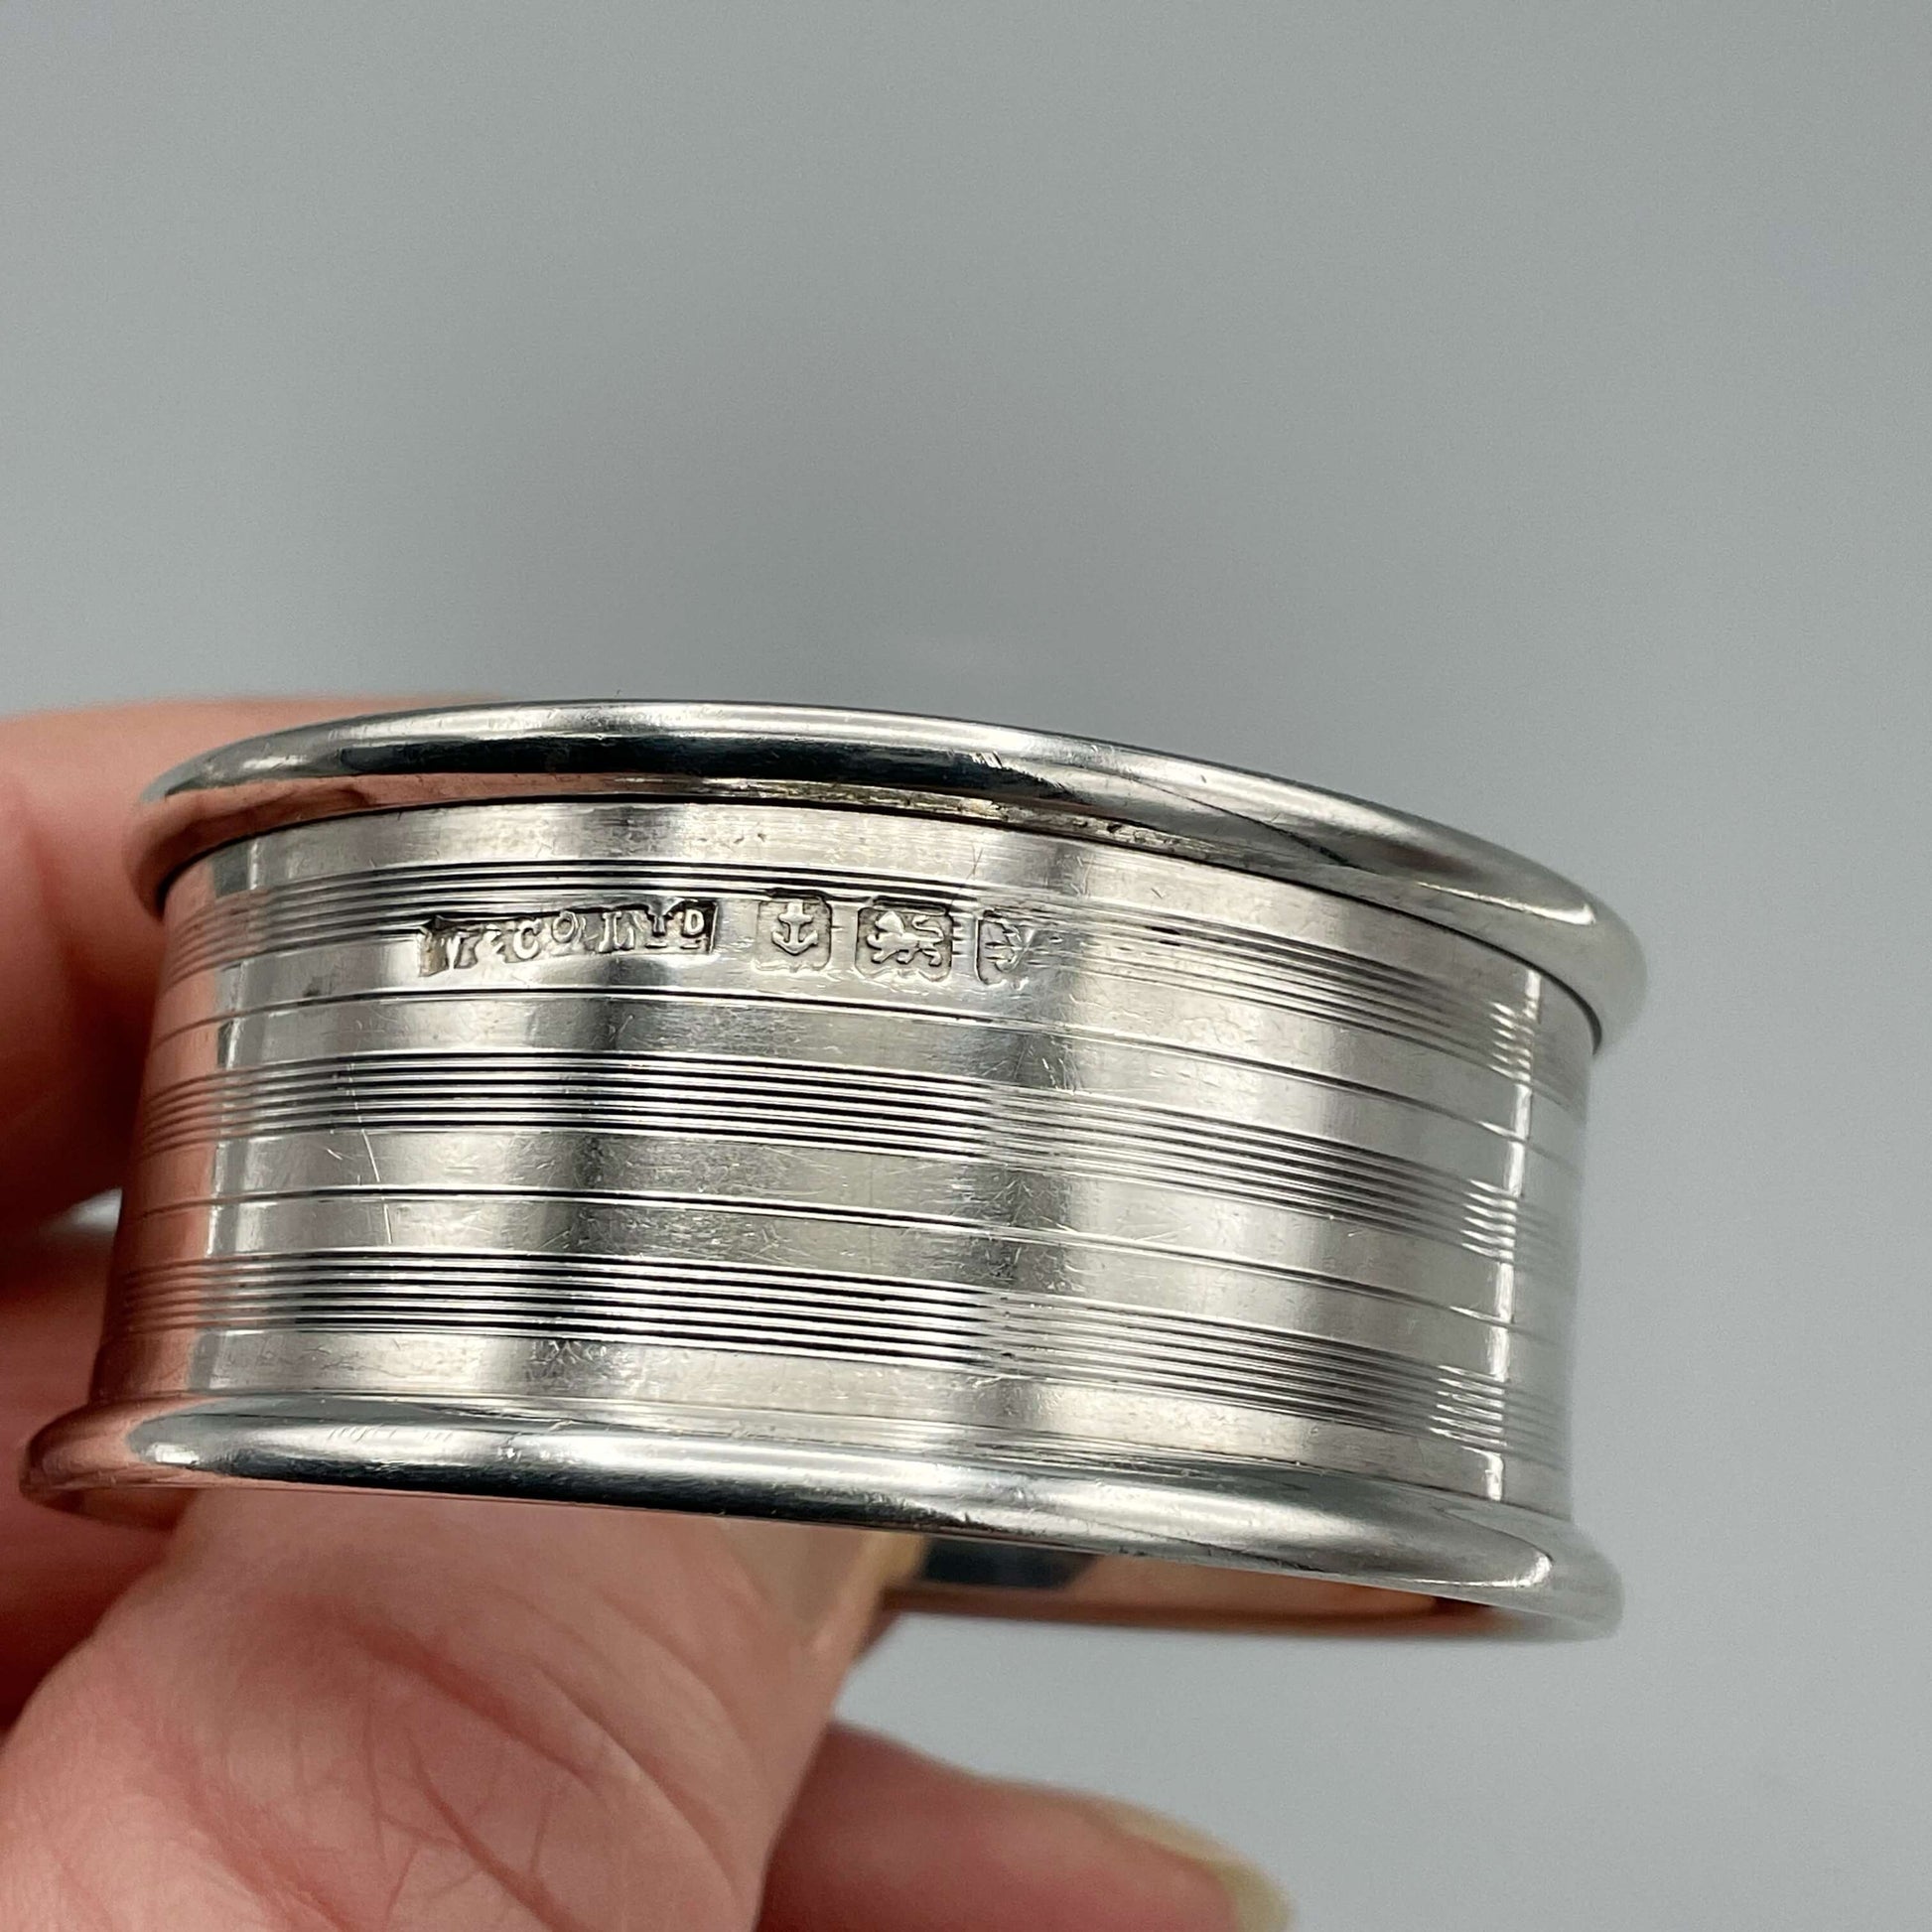 Silver napkin ring showing the hallmarks held in a hand